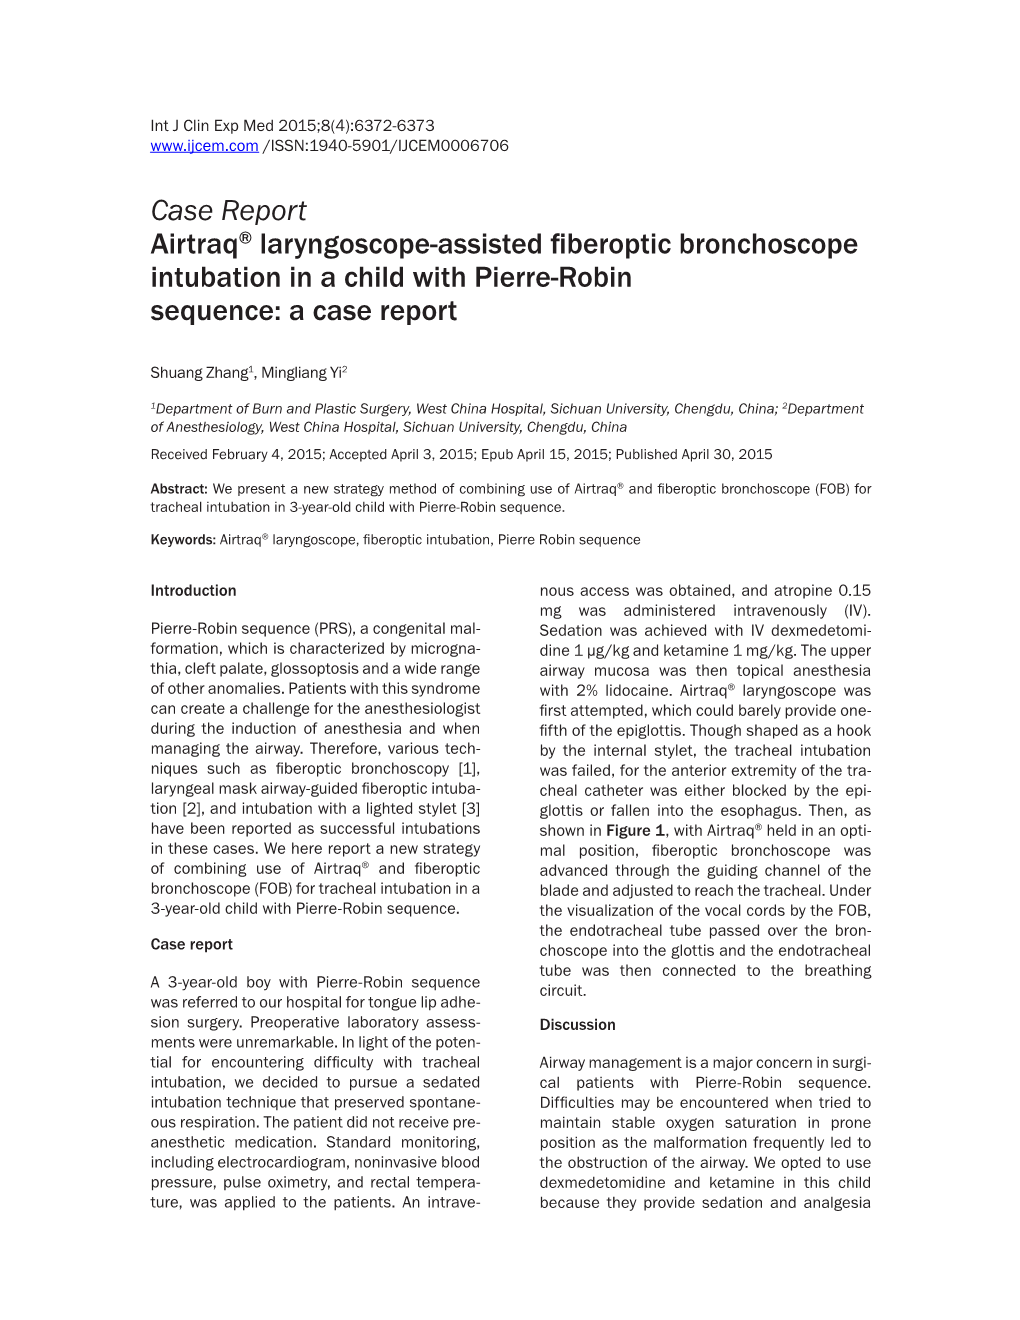 Case Report Airtraq® Laryngoscope-Assisted Fiberoptic Bronchoscope Intubation in a Child with Pierre-Robin Sequence: a Case Report